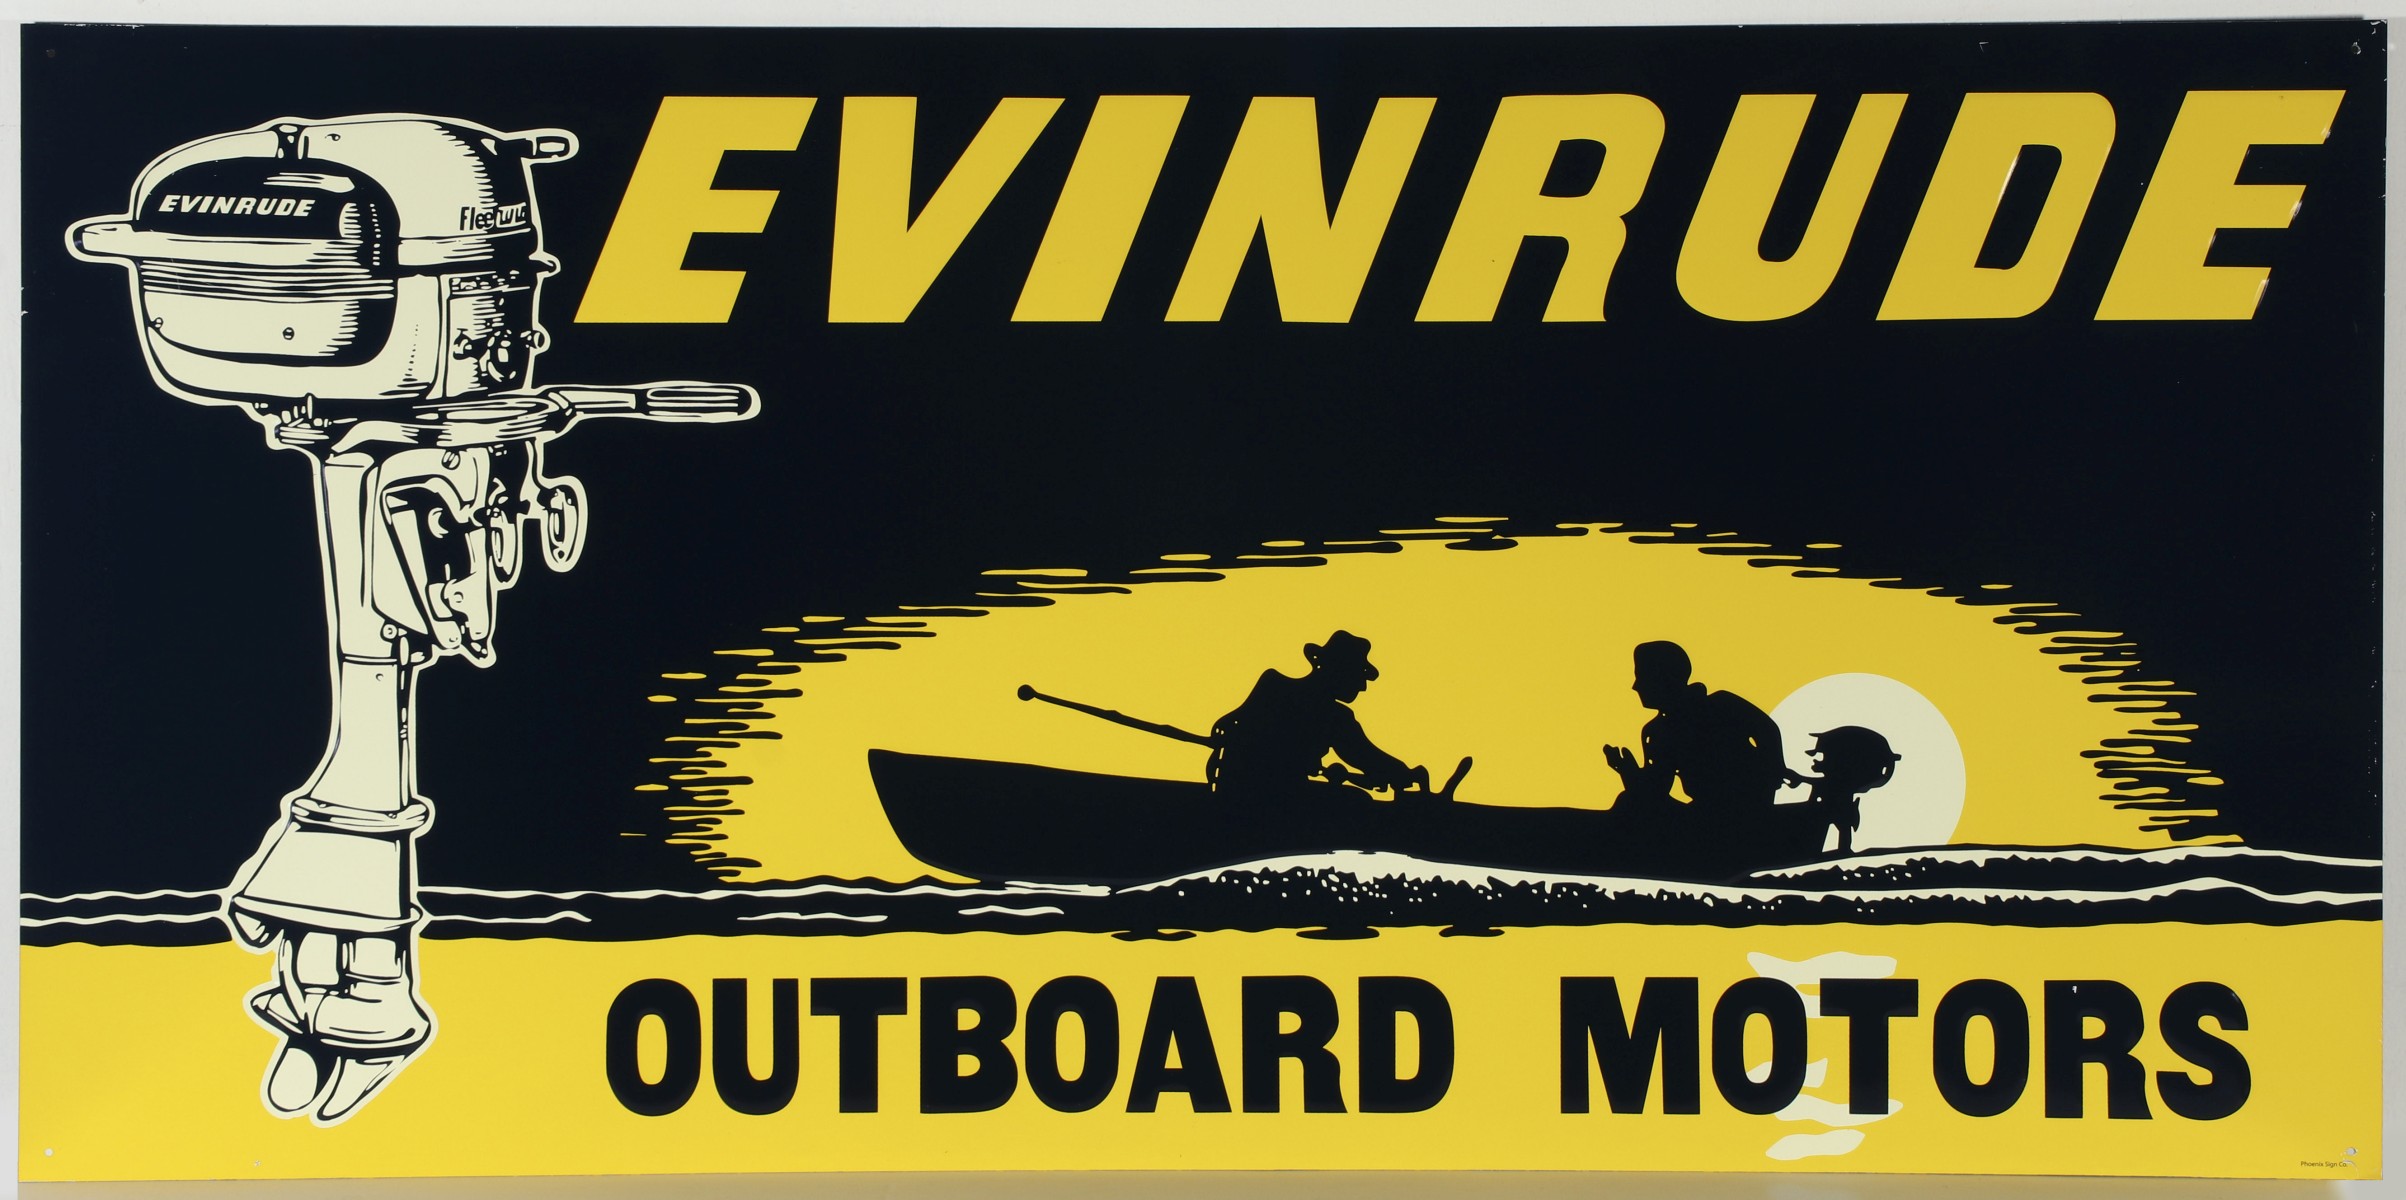 A VERY GOOD EVINRUDE OUTBOARD MOTORS ADVERTISING SIGN